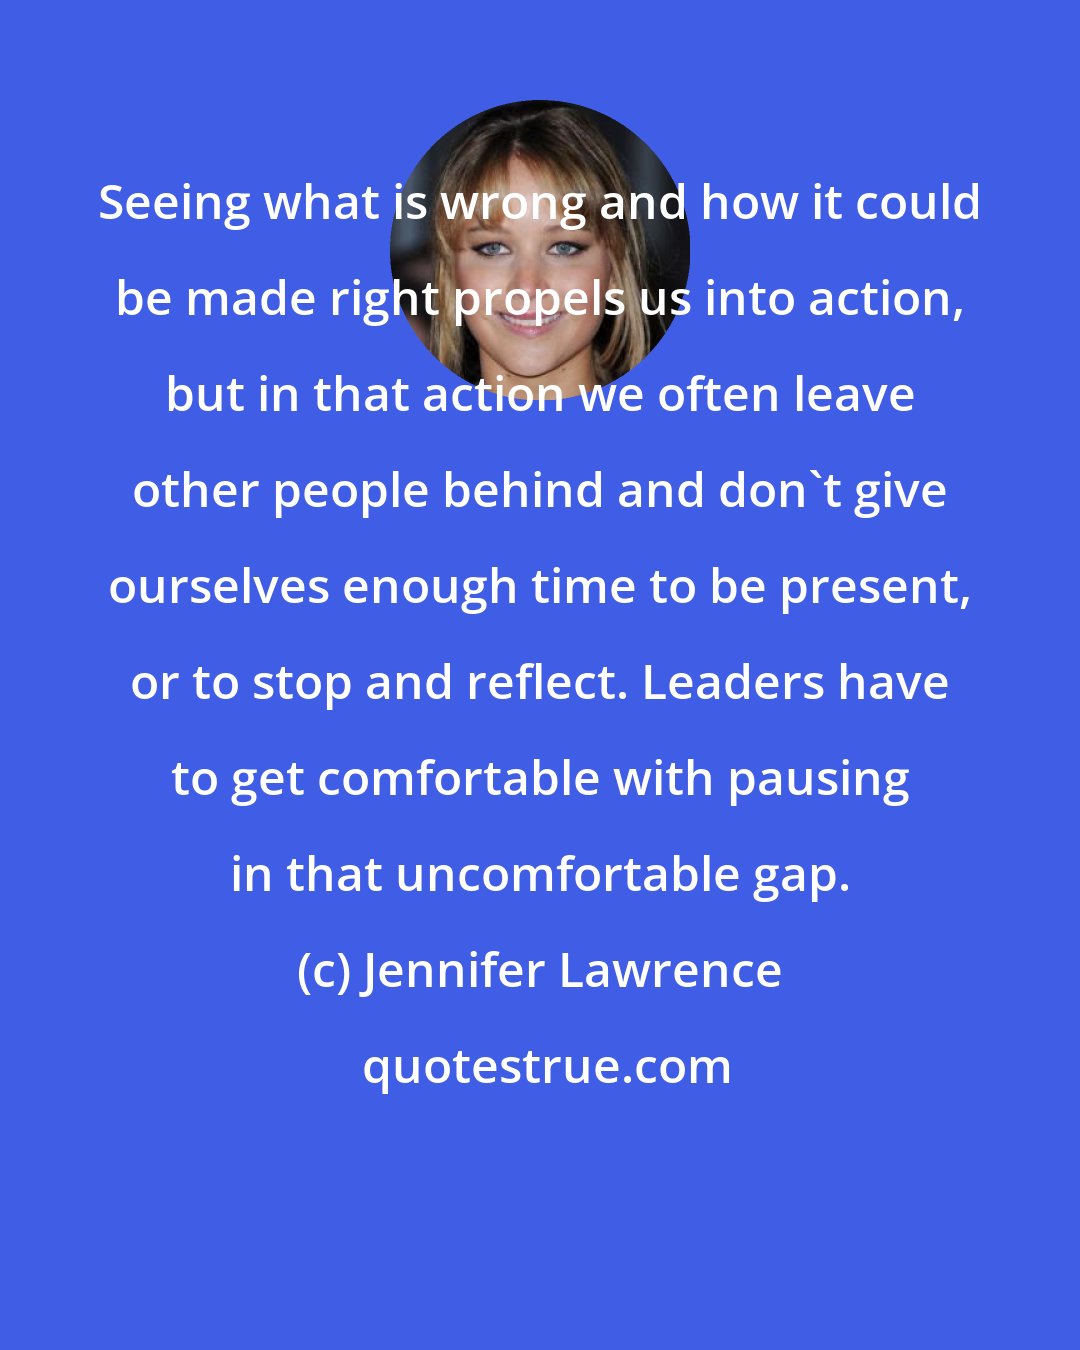 Jennifer Lawrence: Seeing what is wrong and how it could be made right propels us into action, but in that action we often leave other people behind and don't give ourselves enough time to be present, or to stop and reflect. Leaders have to get comfortable with pausing in that uncomfortable gap.